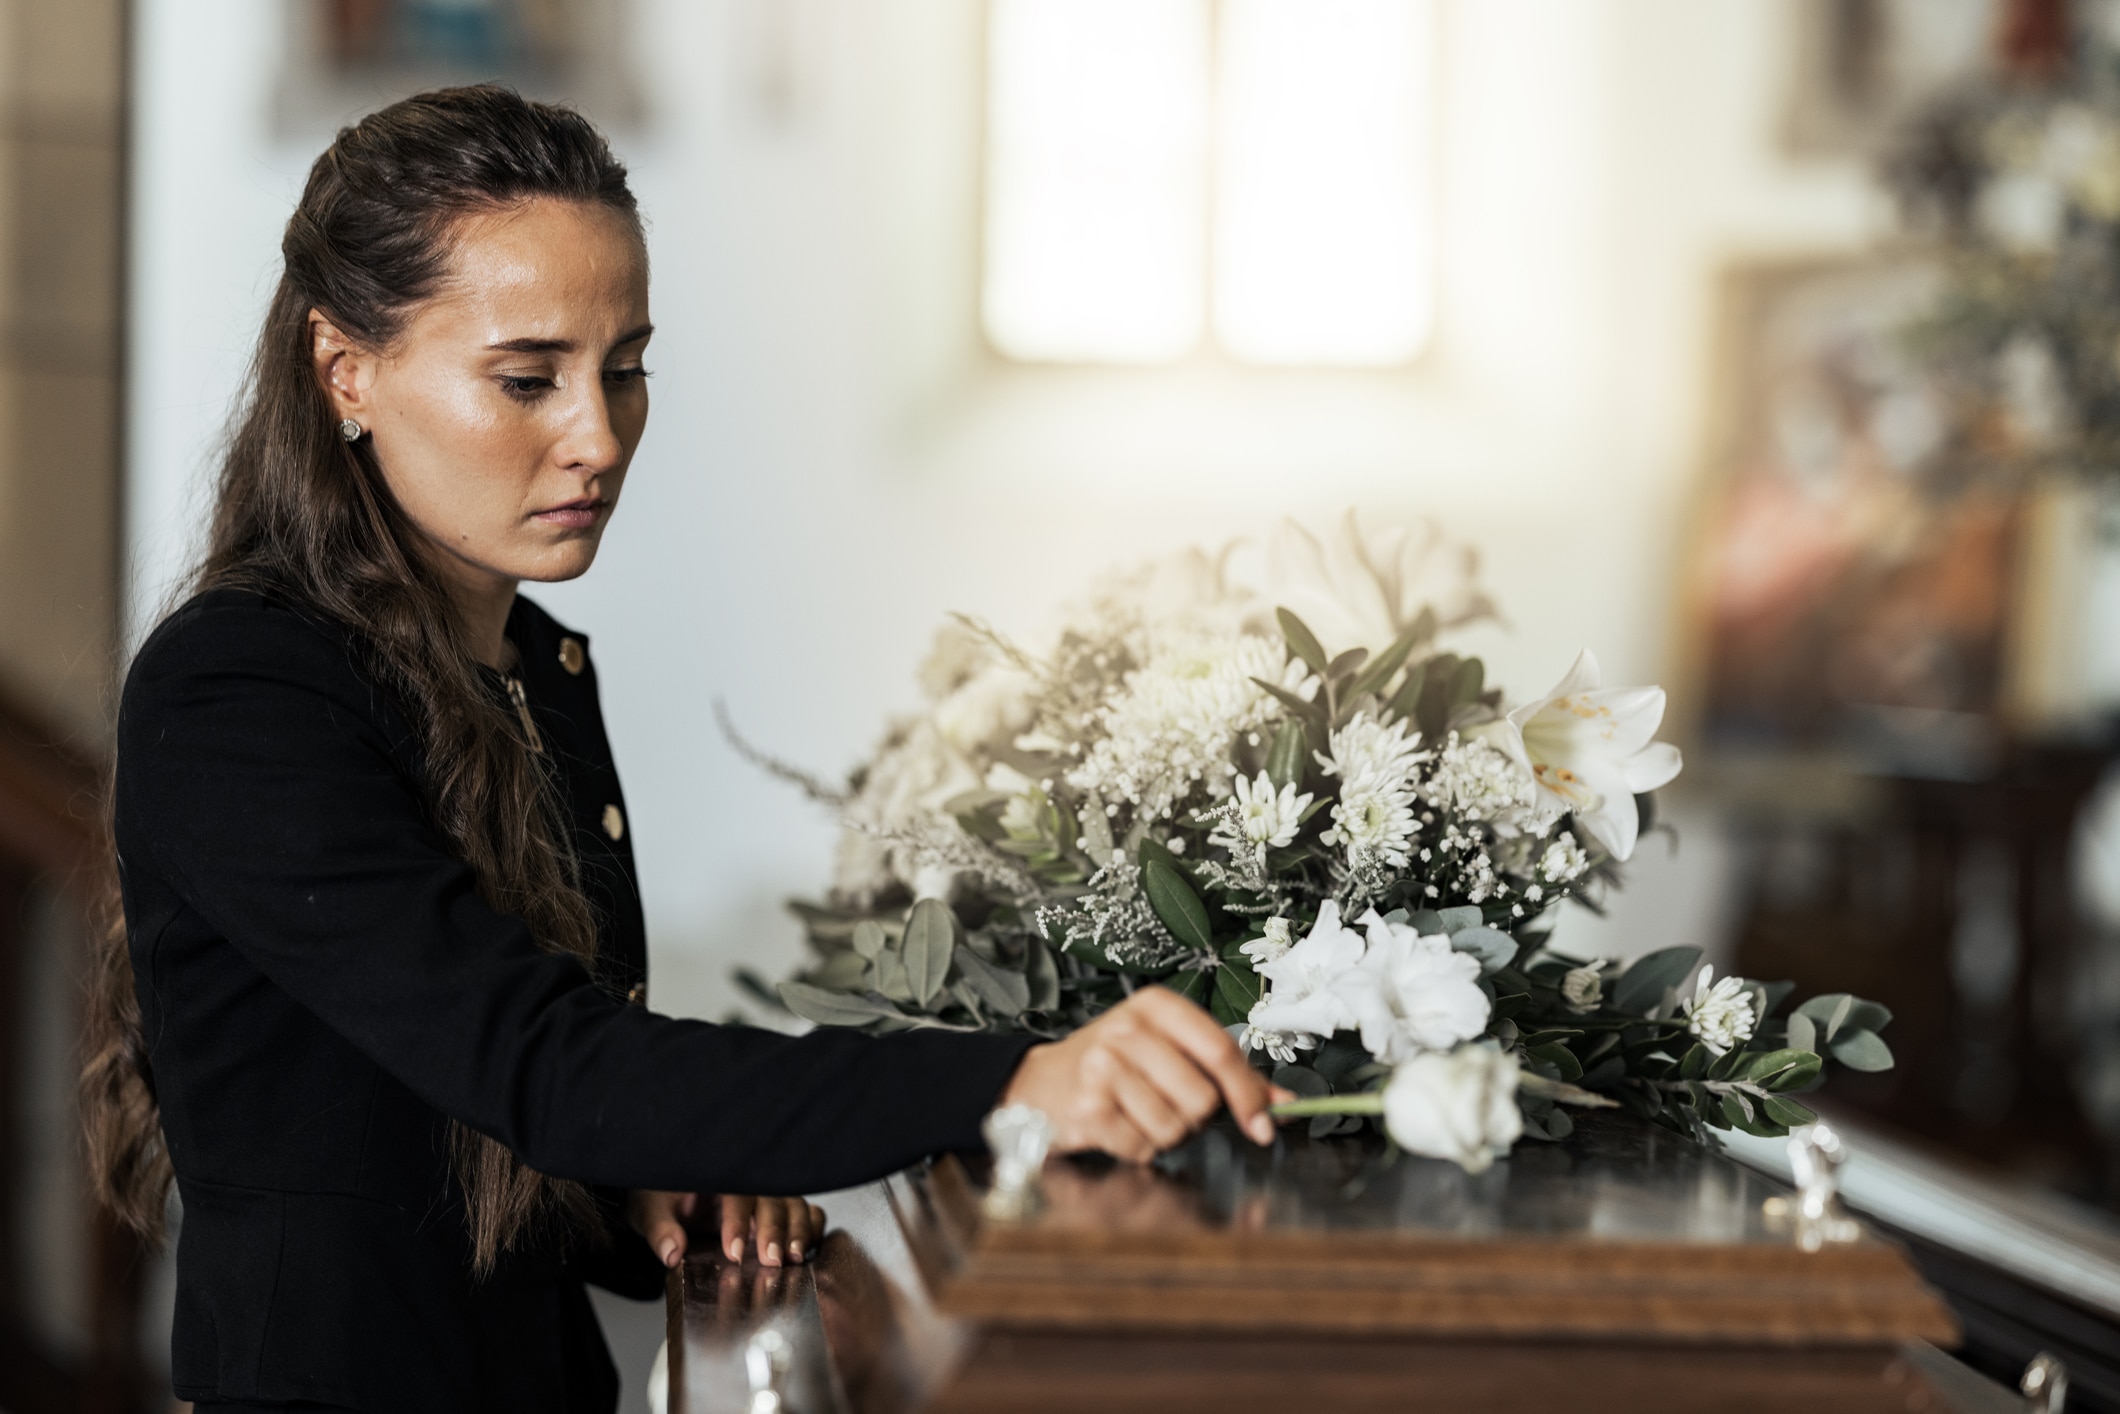 Get justice with your case from the best wrongful death law firm in Lodi, New Jersey.